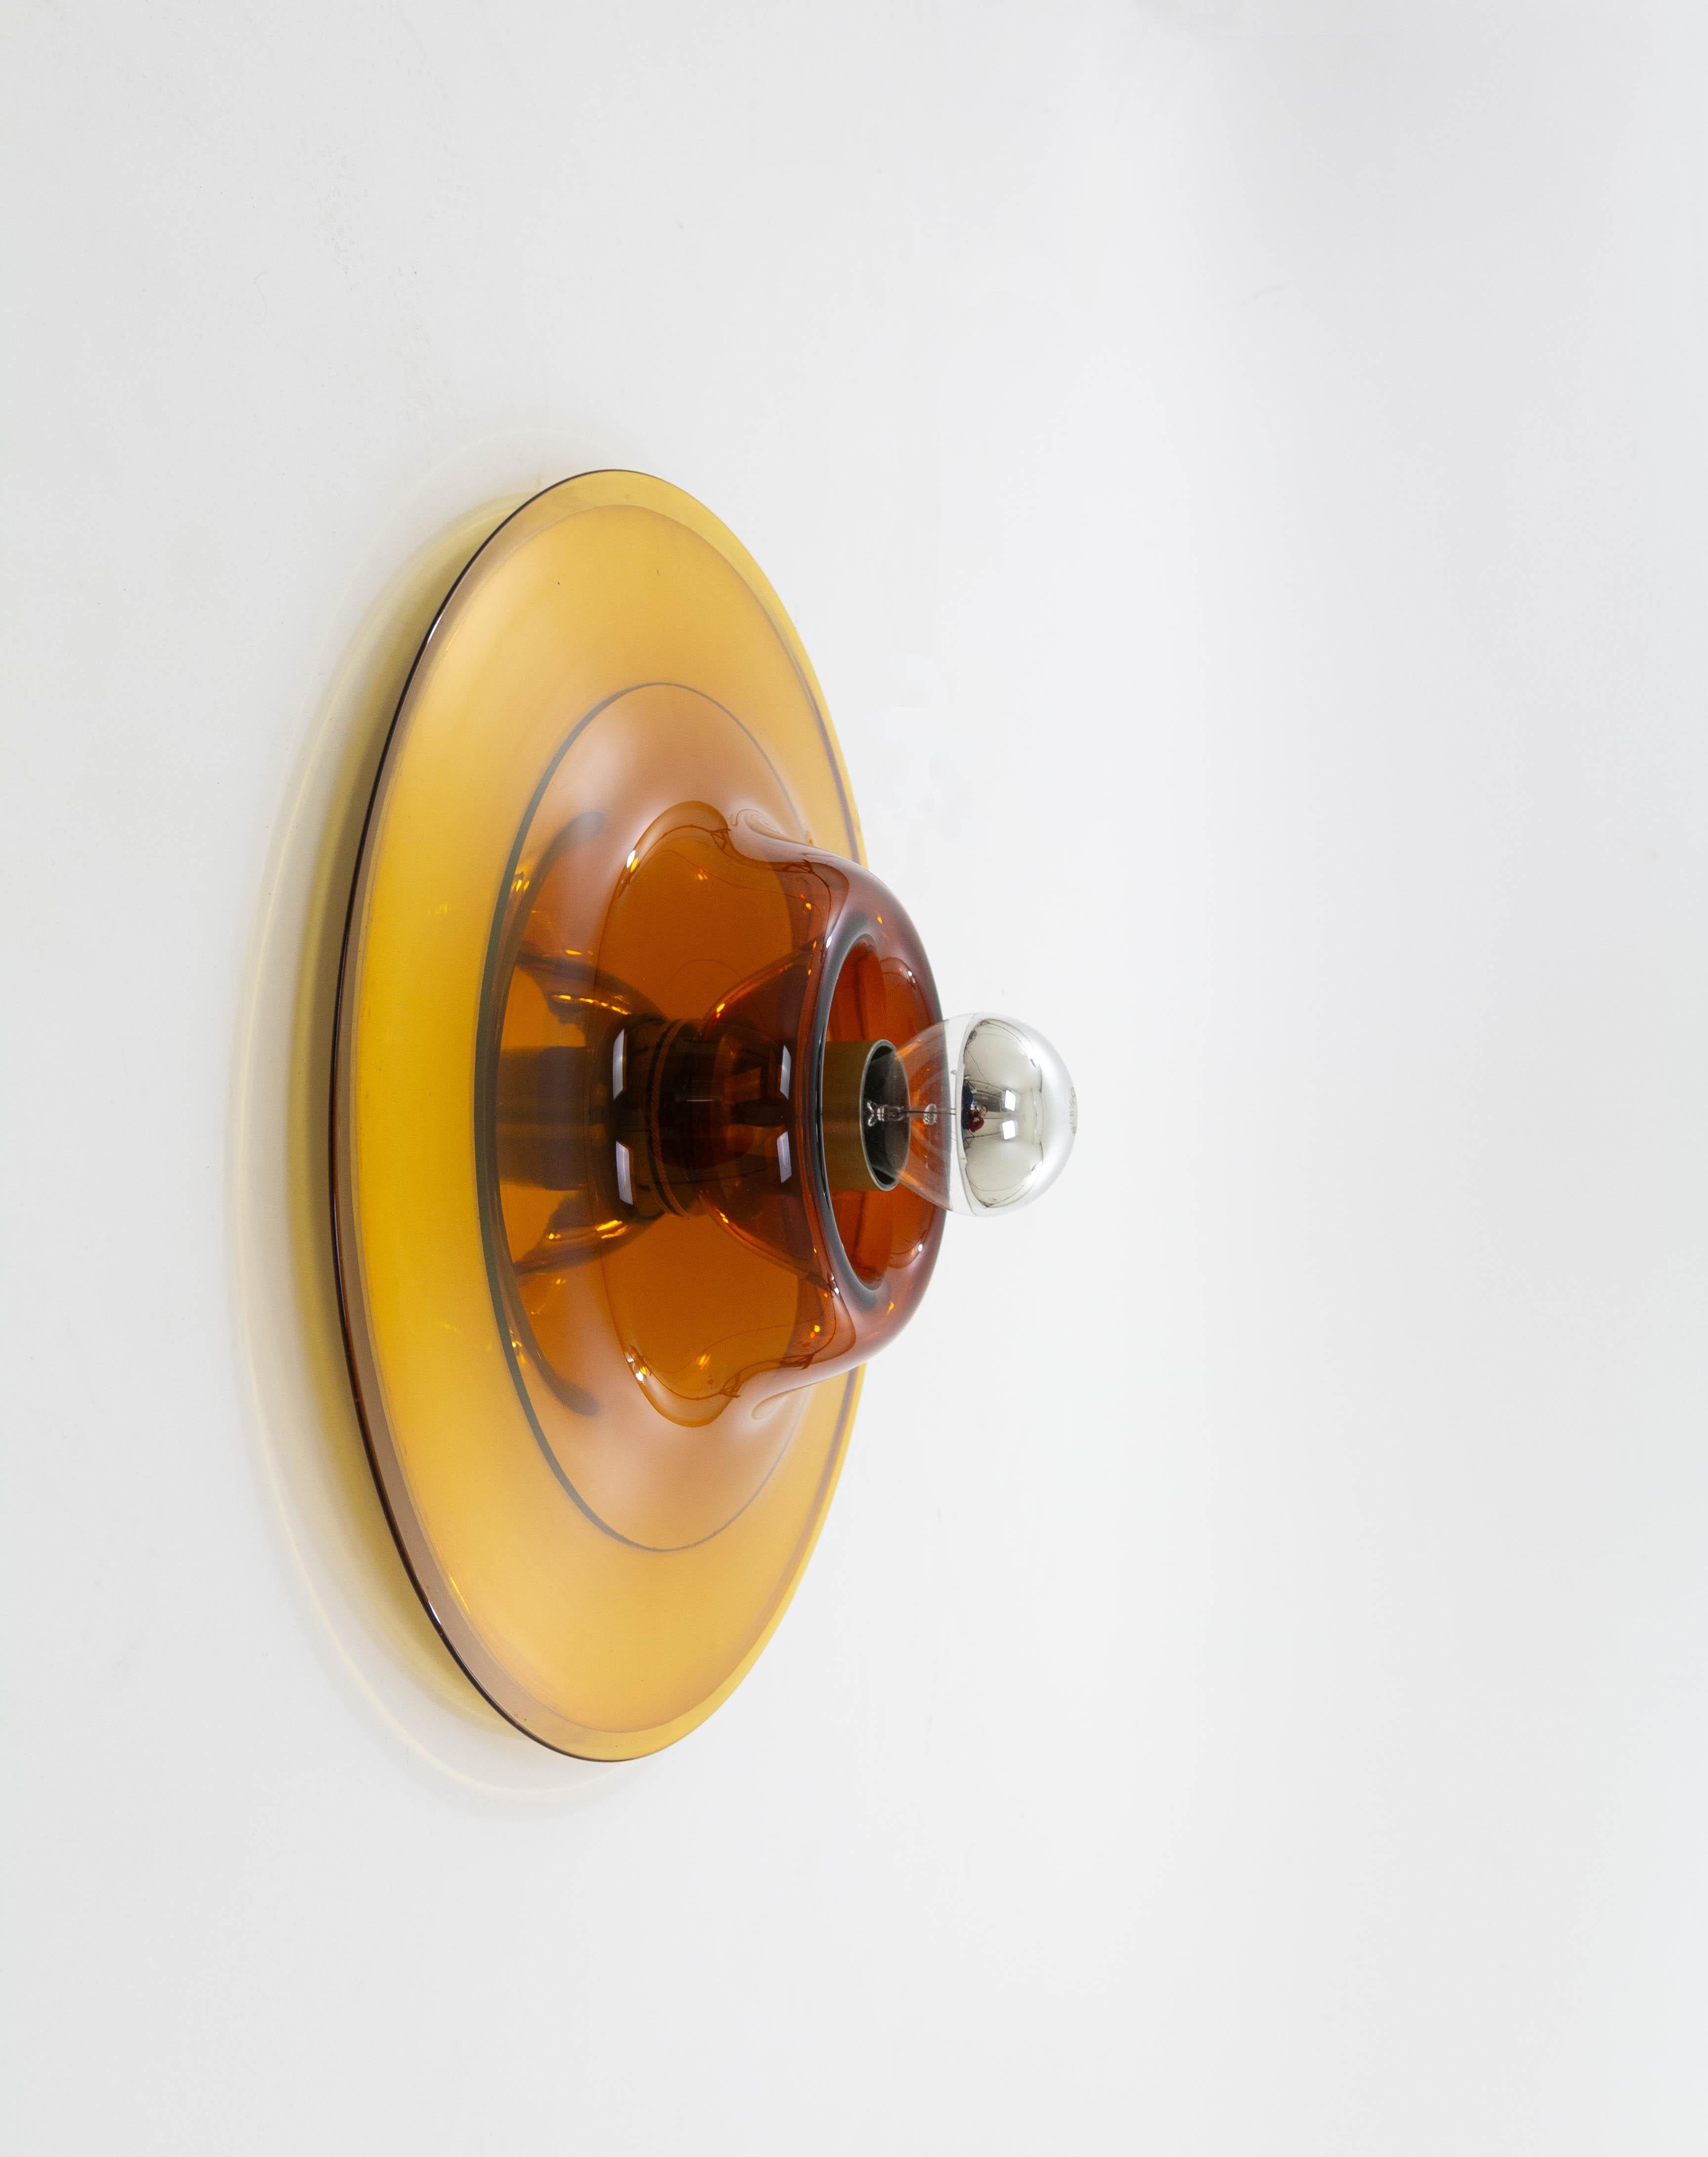 Amber Wall or Ceiling Lamp by Venini for Pierre Cardin, 1970s For Sale 1